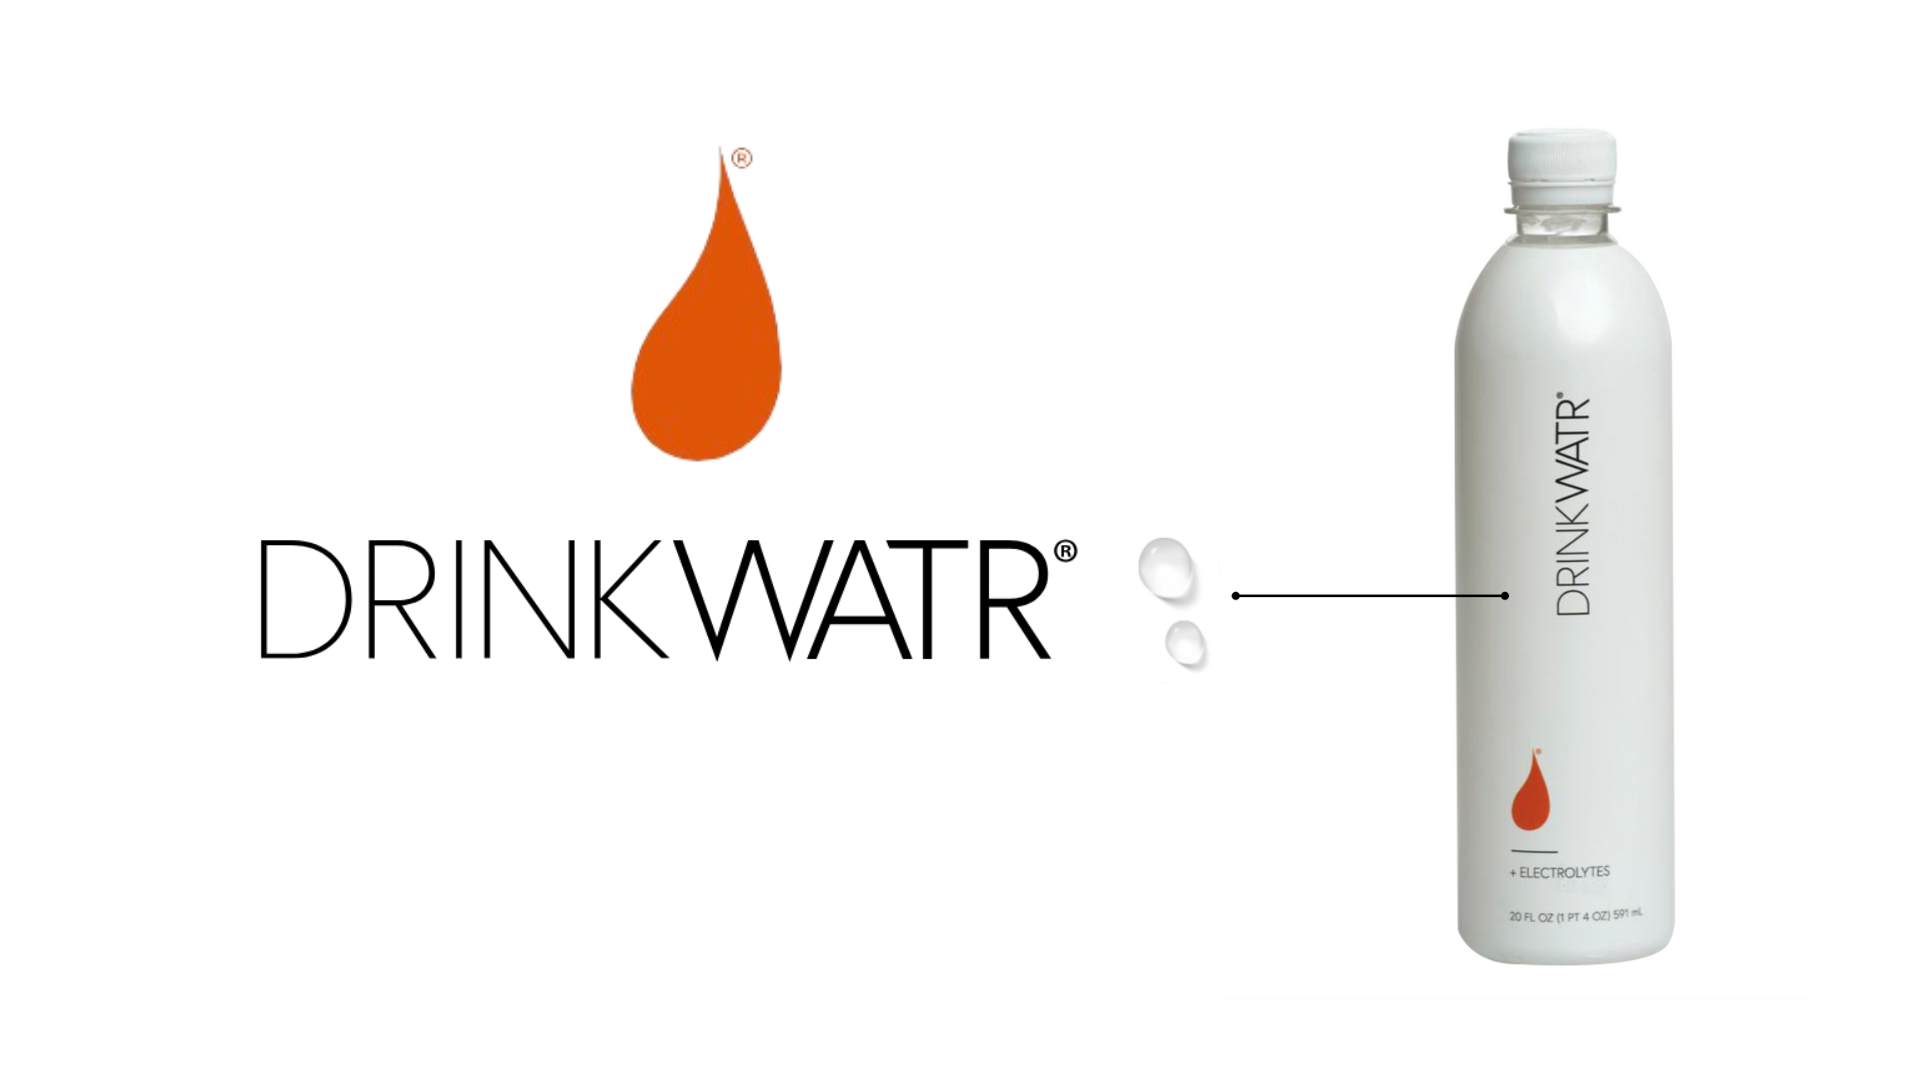 DRINKWATR® Emerges as the Premier Hydration Experience